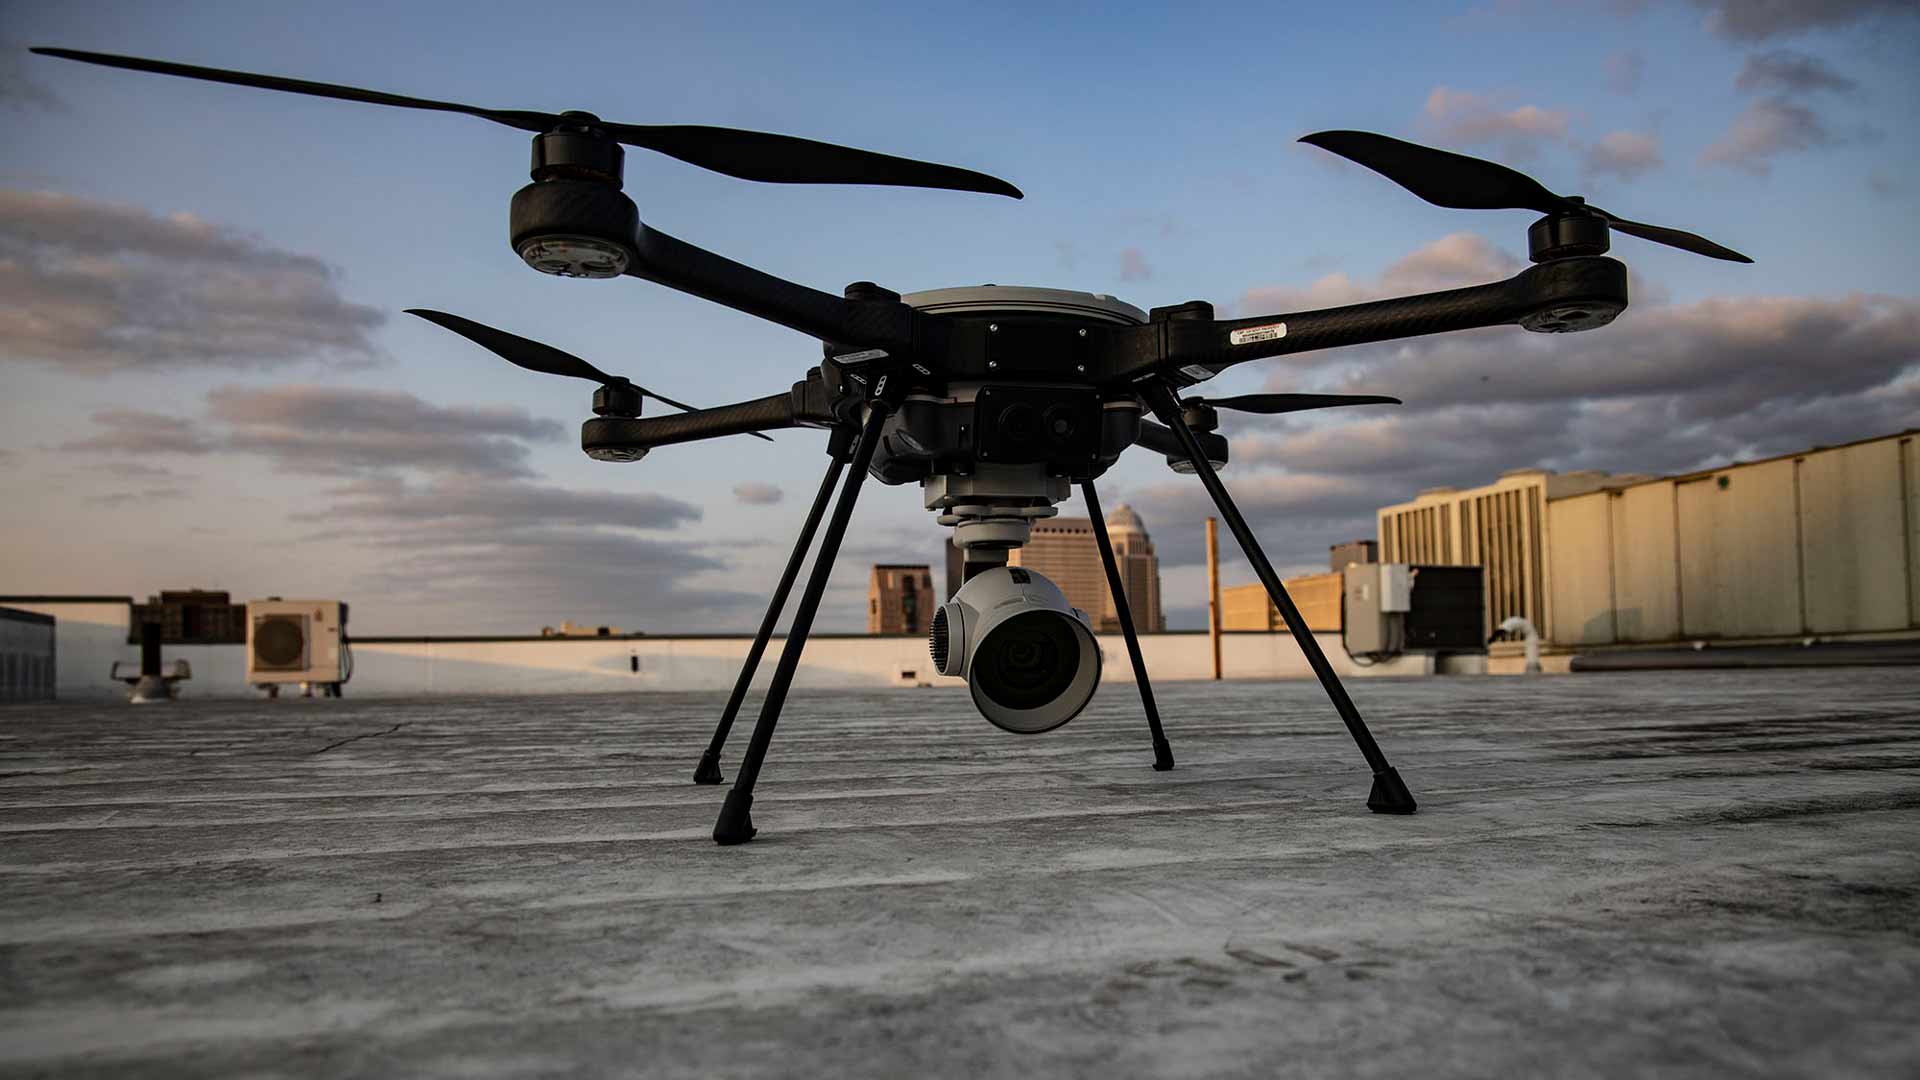 A Customs and Border Protection drone is ready for launch in this undated photo. While U.S. military and border officials use drones for border surveillance, they say cartels may be sending many as 1,000 drones a month across the border to probe for weaknesses and sometimes deliver illicit goods. 